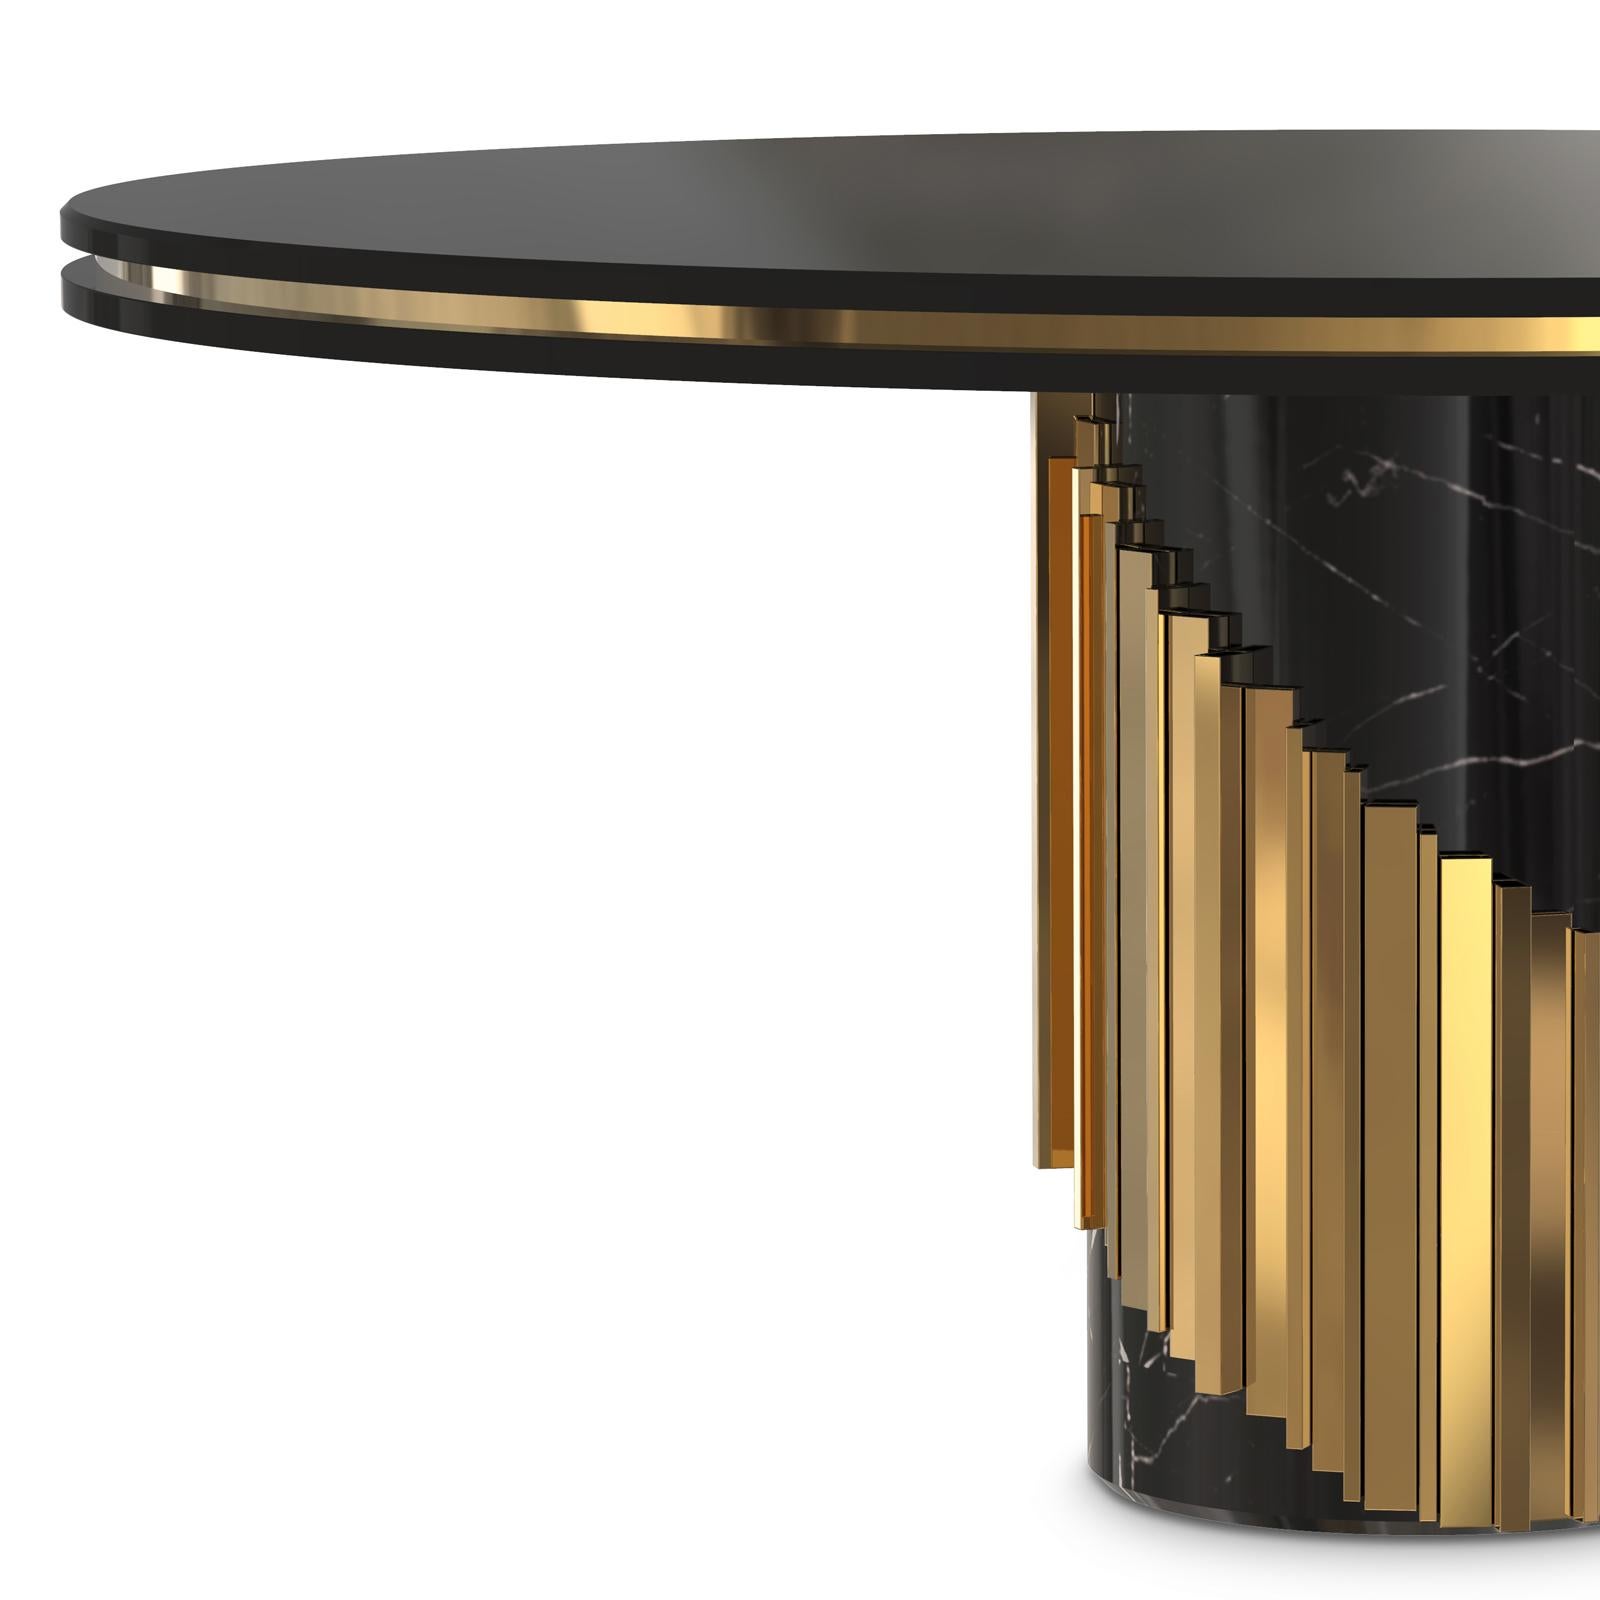 Table maxima round with wooden black lacquered top
with polished brass rim around. On black marble base
with polished brass rods around the base.